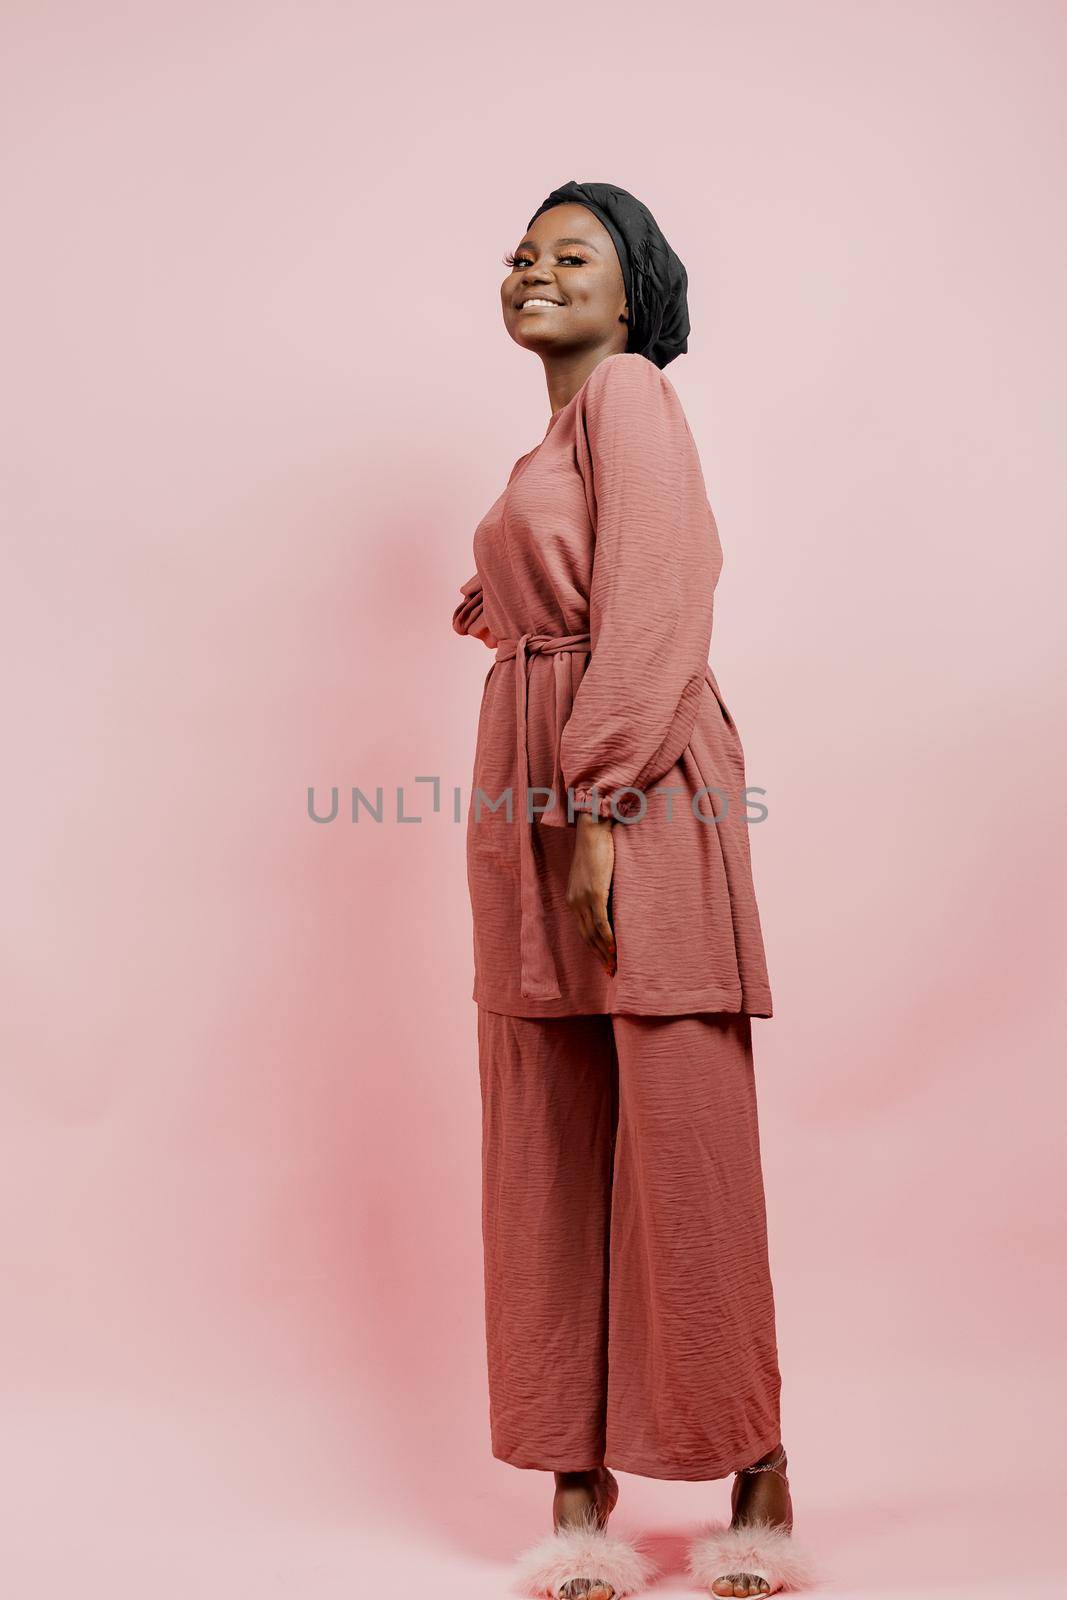 Muslim young woman weared in traditional dress and scarf isolated on pink background. Attractive and happy black model in studio